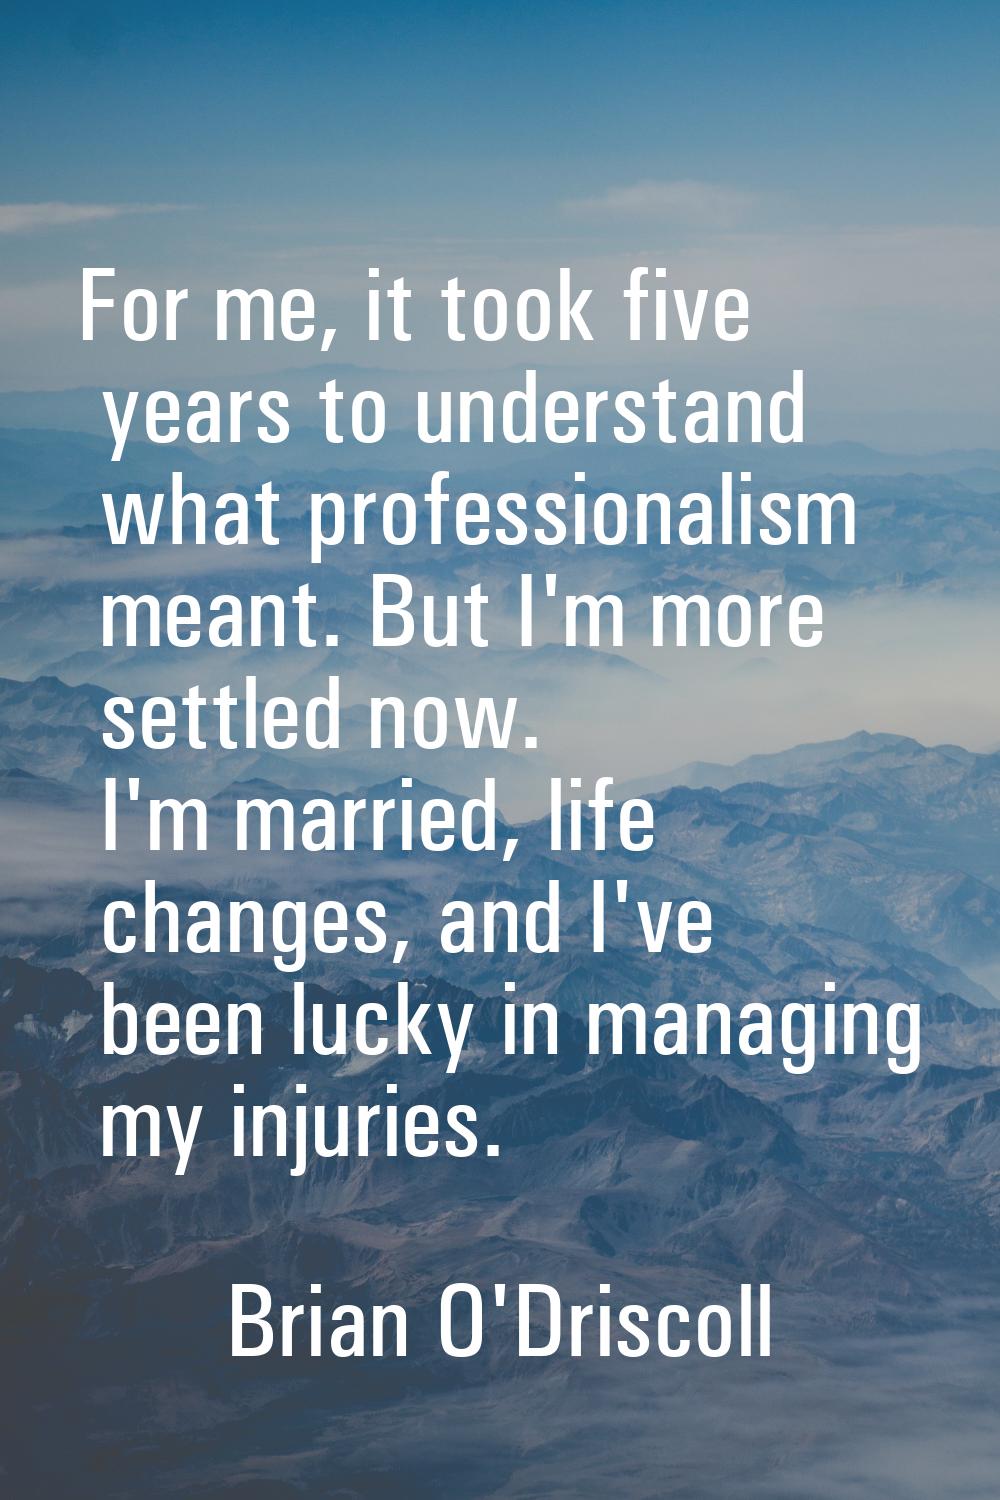 For me, it took five years to understand what professionalism meant. But I'm more settled now. I'm 